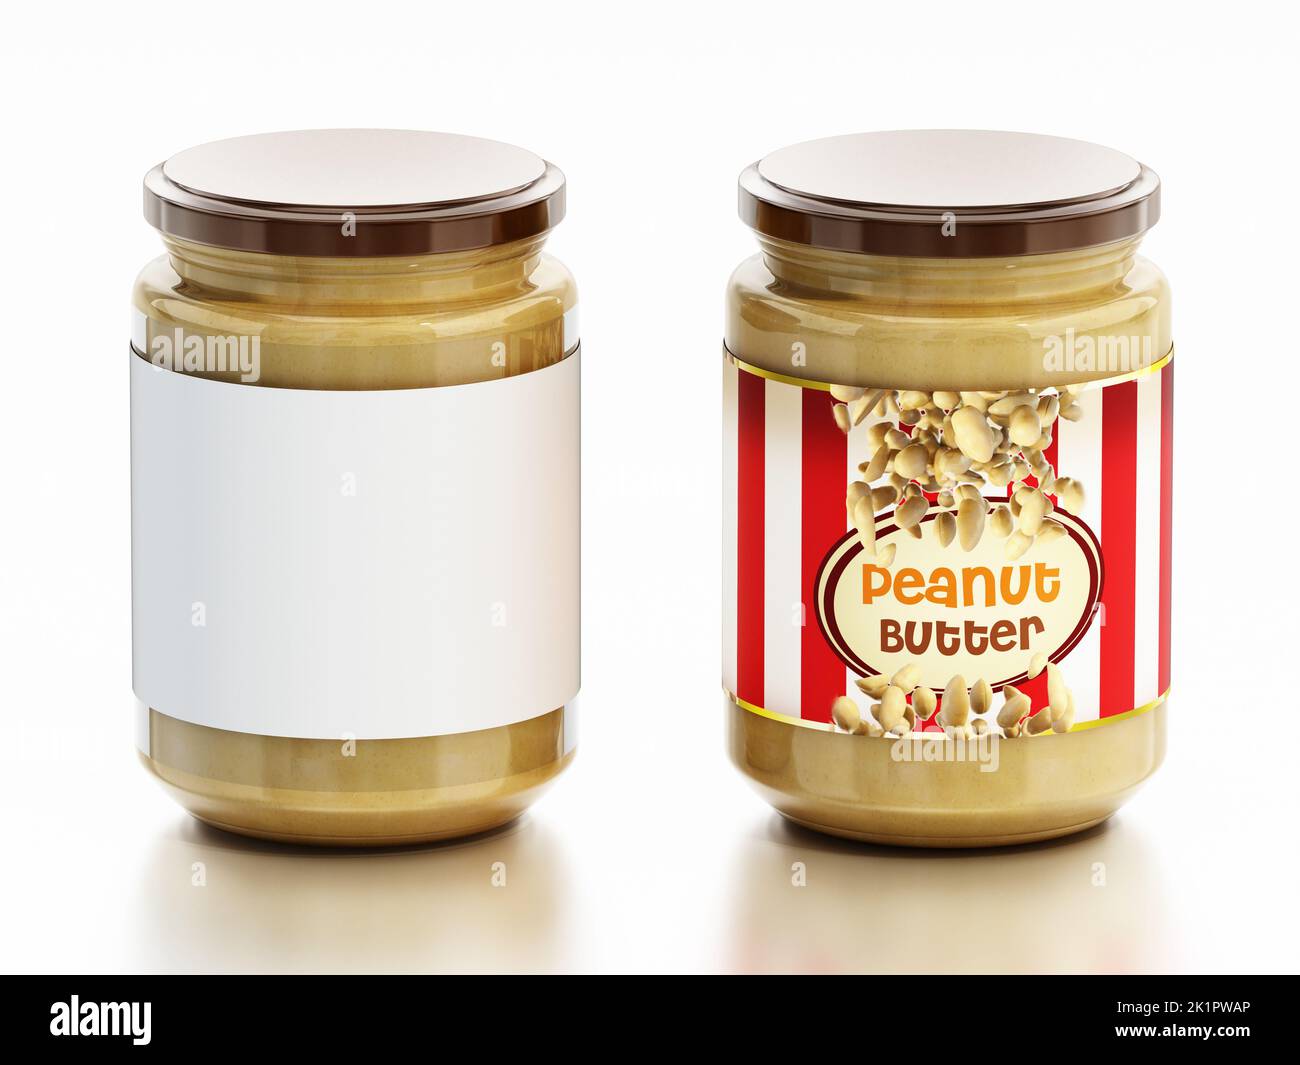 Peanut butter jars with white and product labels isolated on white background. 3D illustration. Stock Photo